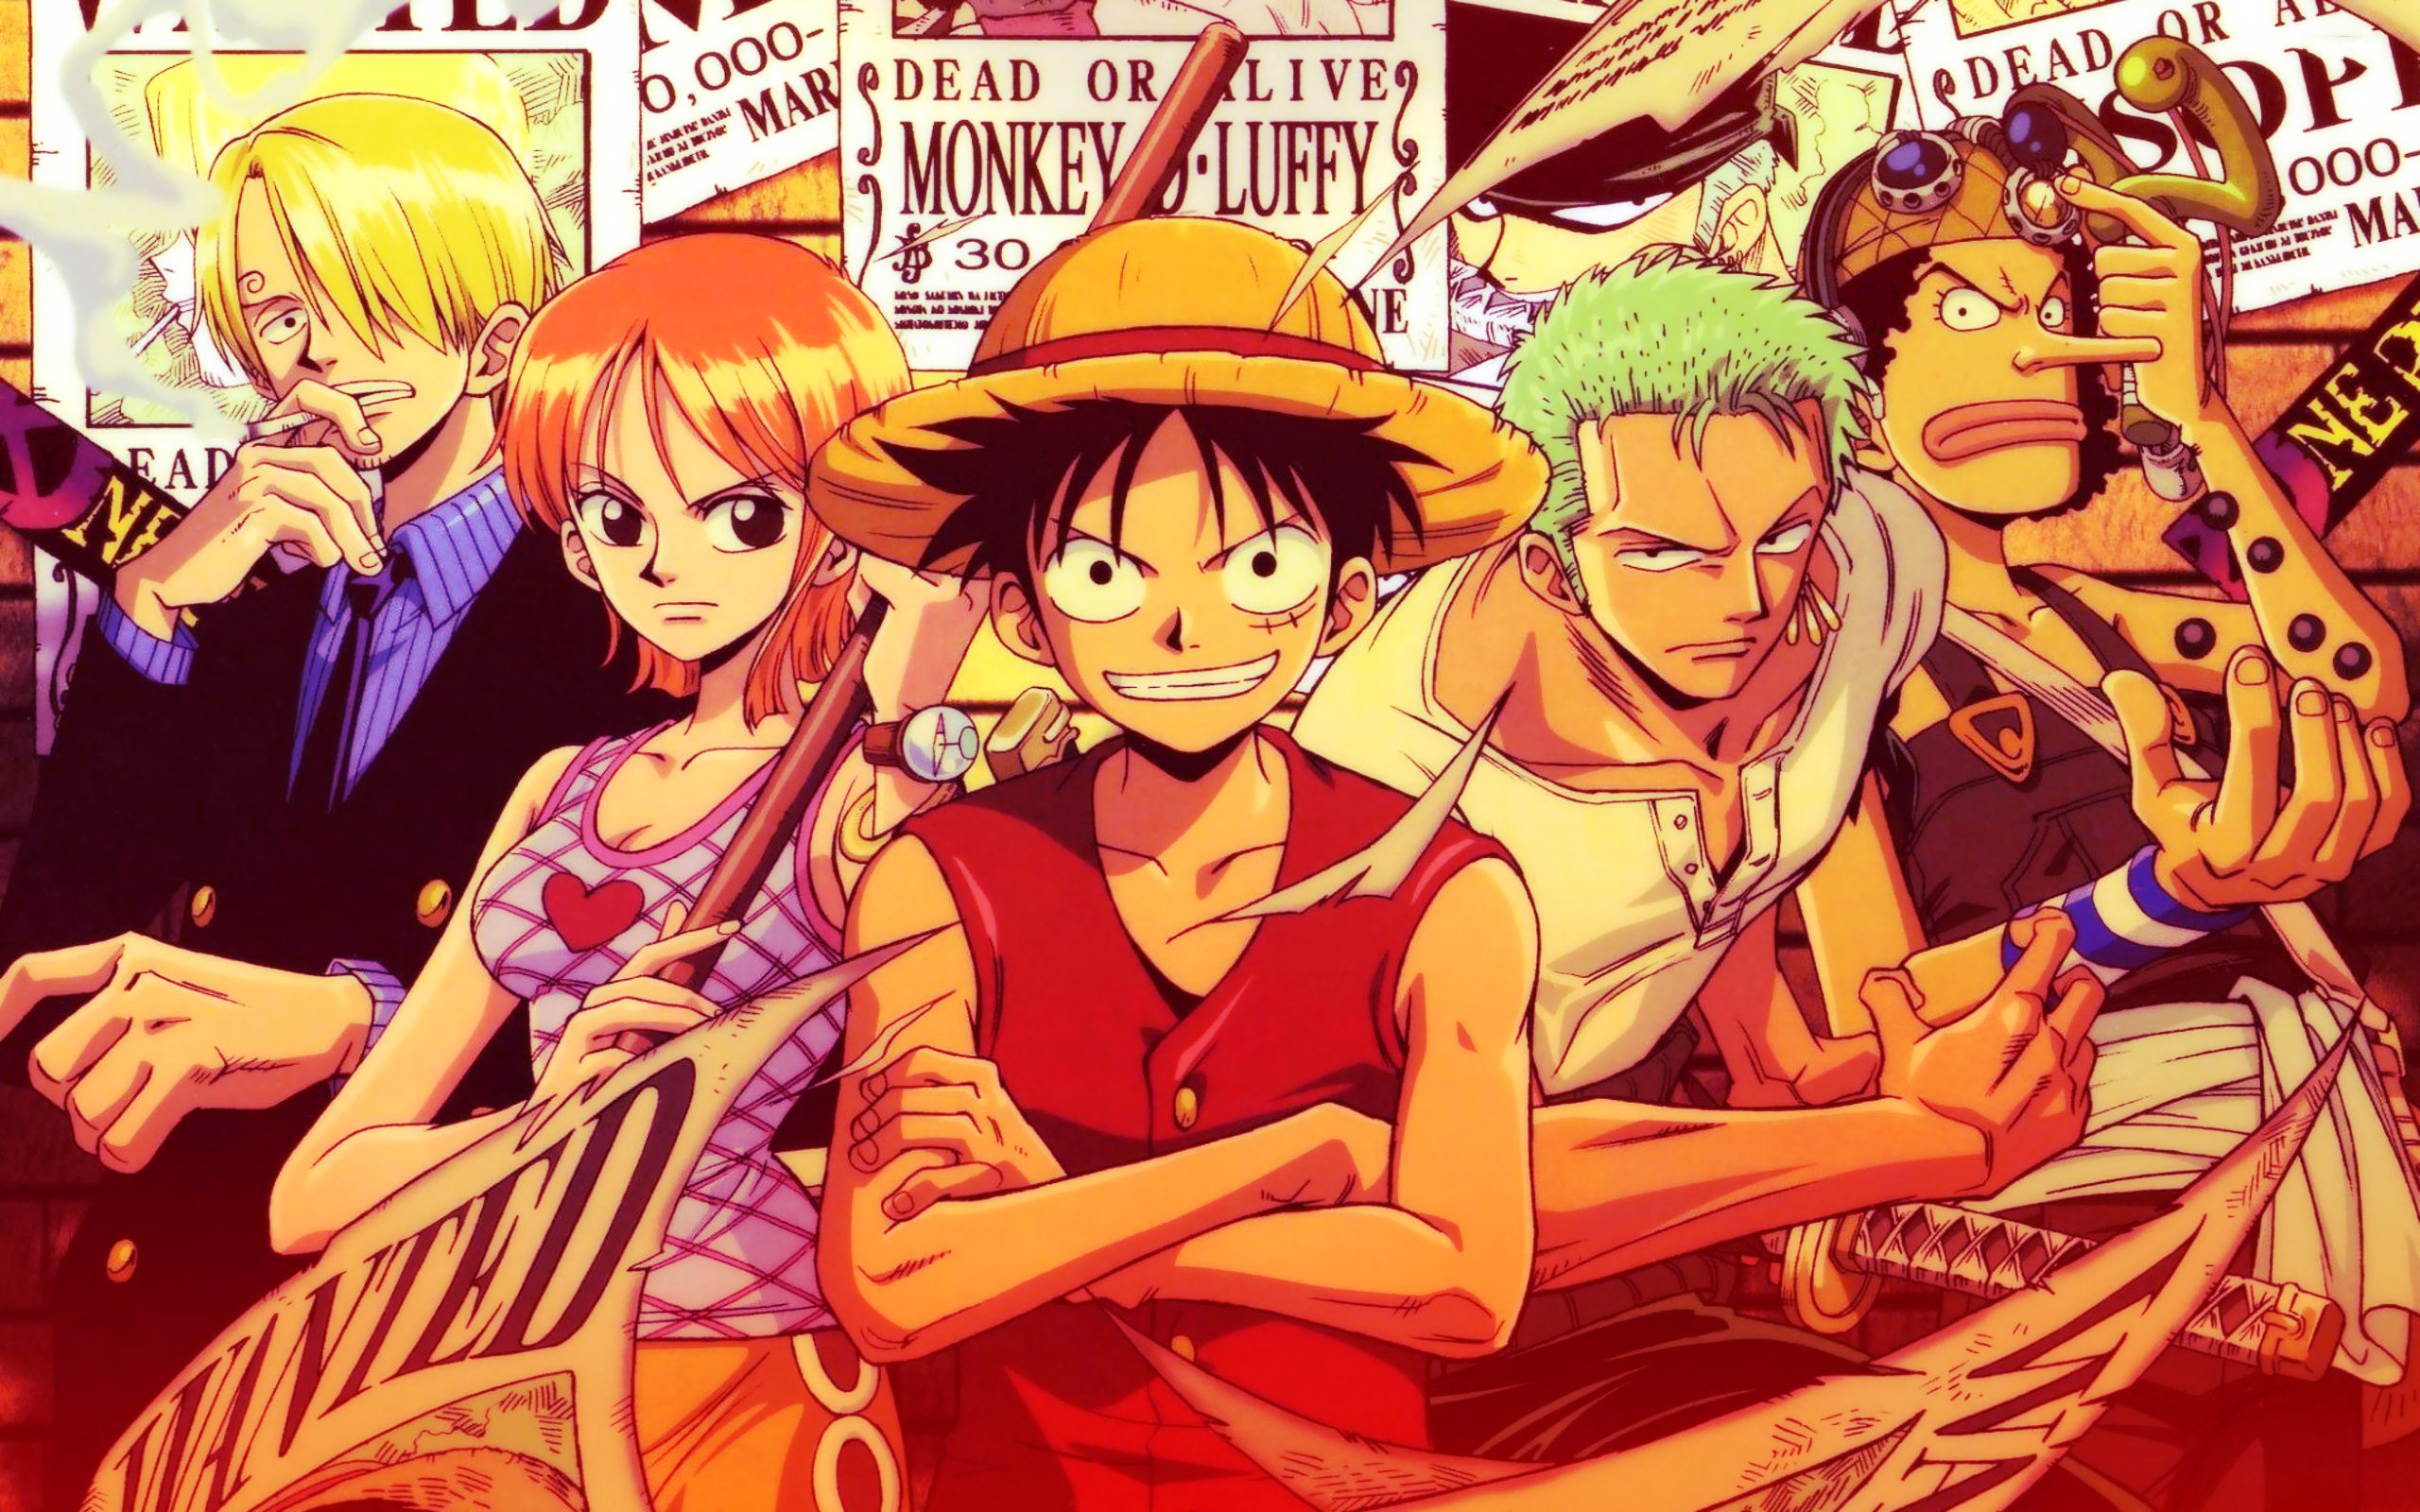 Anime 2560x1600 One Piece Monkey D. Luffy Nami Roronoa Zoro Usopp Sanji staff Wanted posters cigarettes straw hat smoking arms crossed scars looking at viewer frown anime boys anime girls closed mouth short hair hair over one eye paper bracelets sword